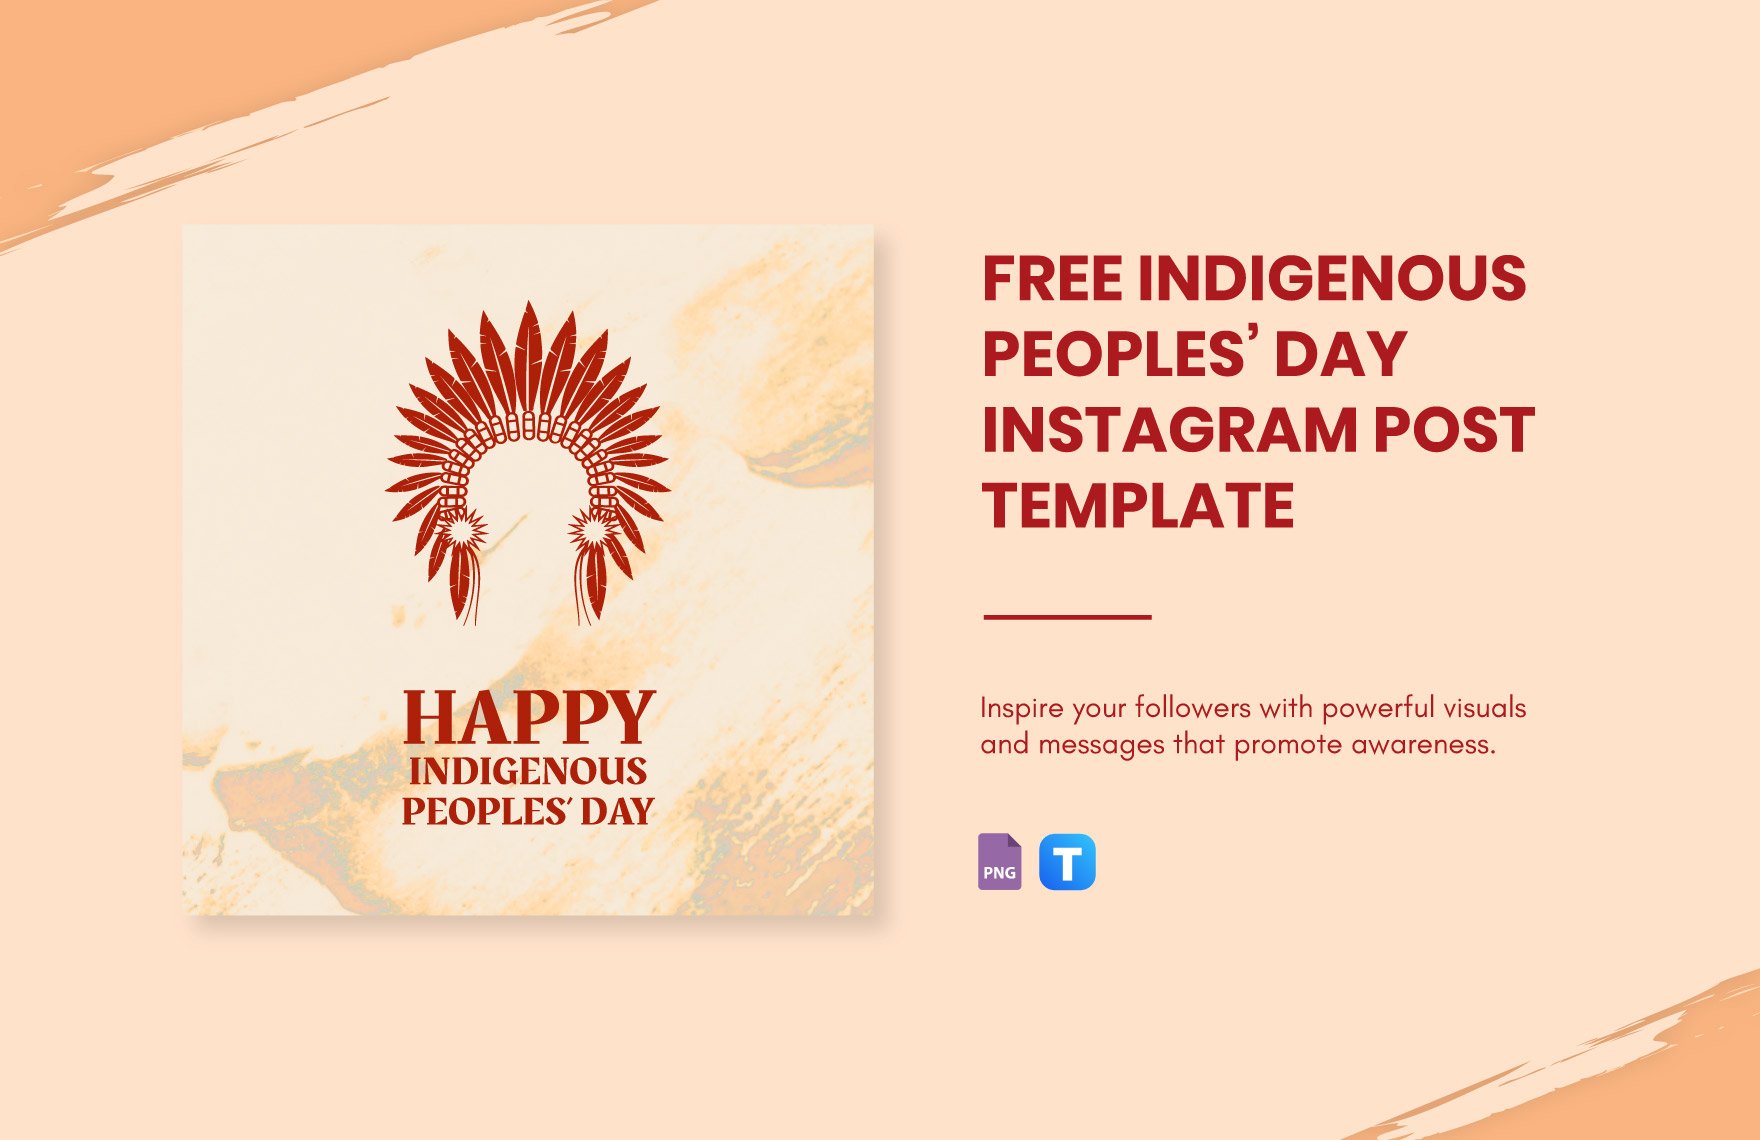 Free Indigenous Peoples' Day Instagram Post Template